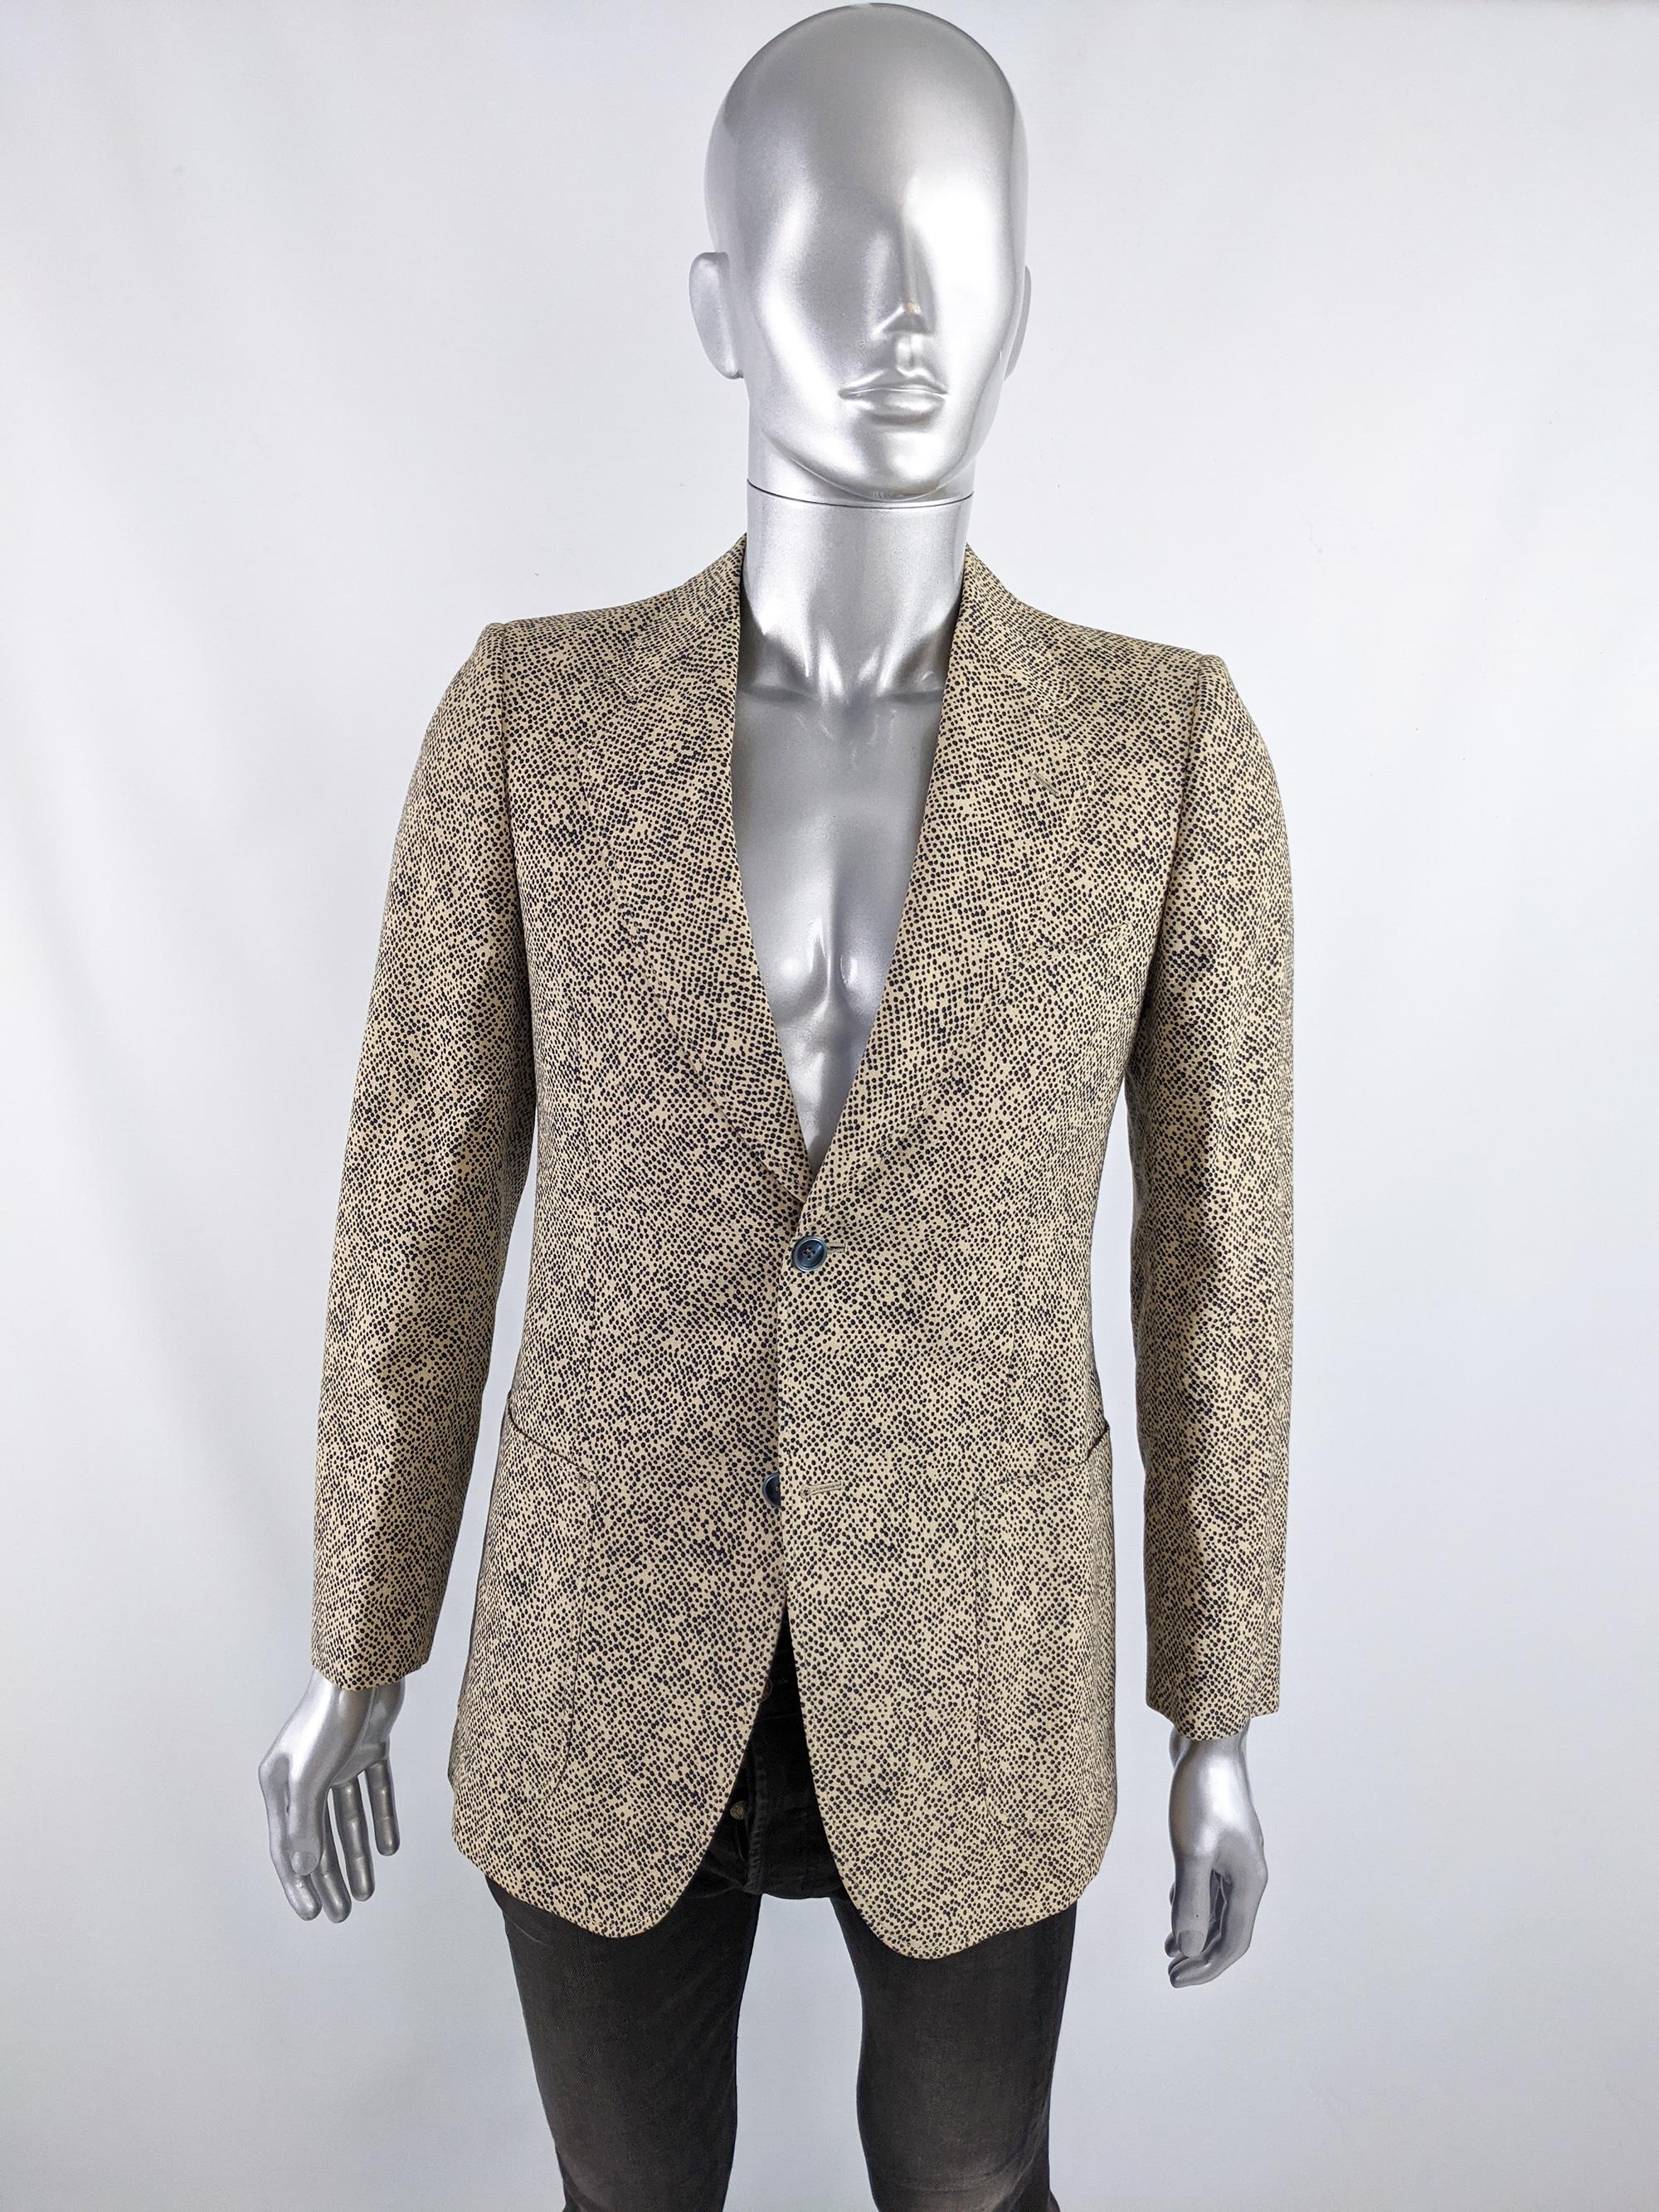 An incredible vintage mens blazer jacket / sport coat from the early 70s by Italian textile company, Texere for Lebole. In a synthetic fabric with an amazing spotty print throughout. It has wide, notched lapels and single breasted buttons.

Size: